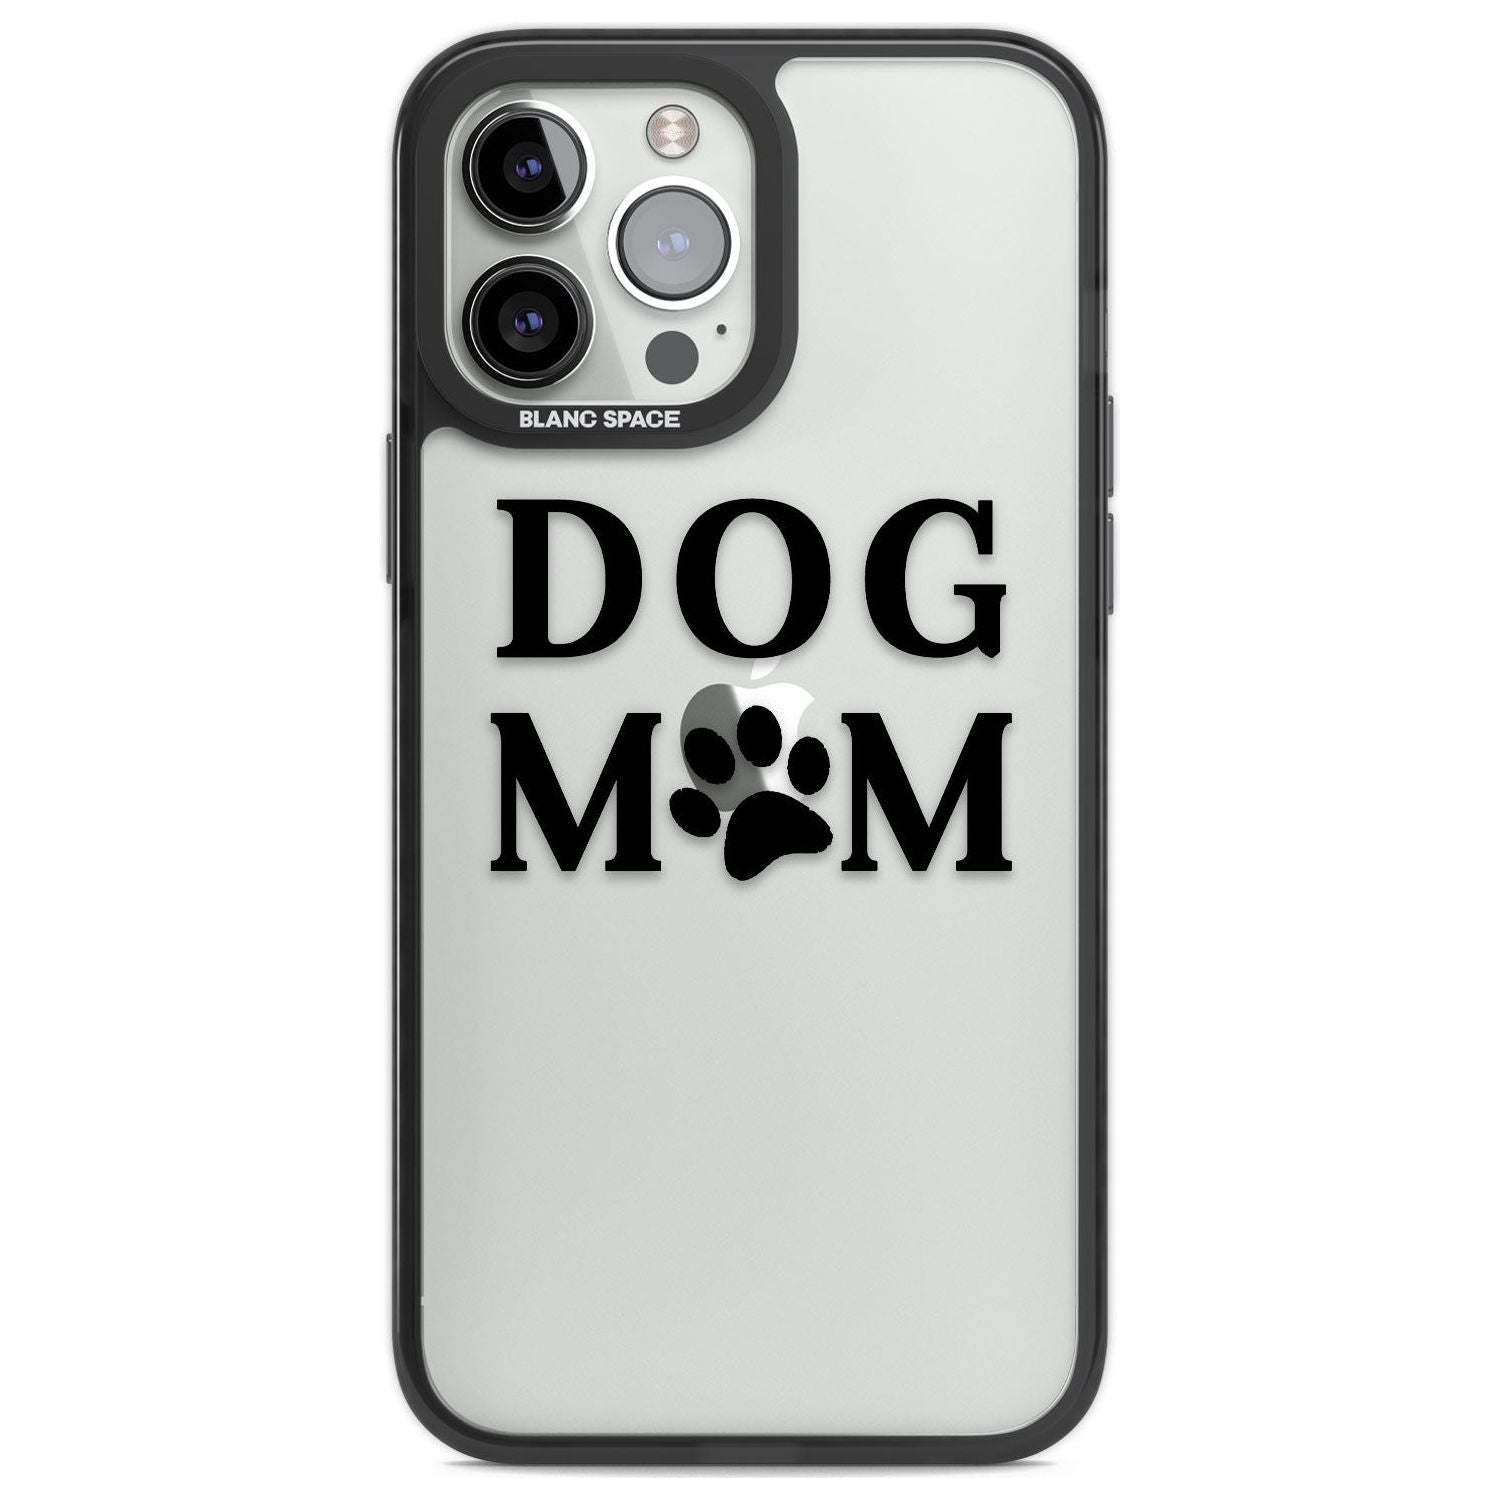 Dog Mom Paw Print Phone Case iPhone 13 Pro Max / Black Impact Case,iPhone 14 Pro Max / Black Impact Case Blanc Space